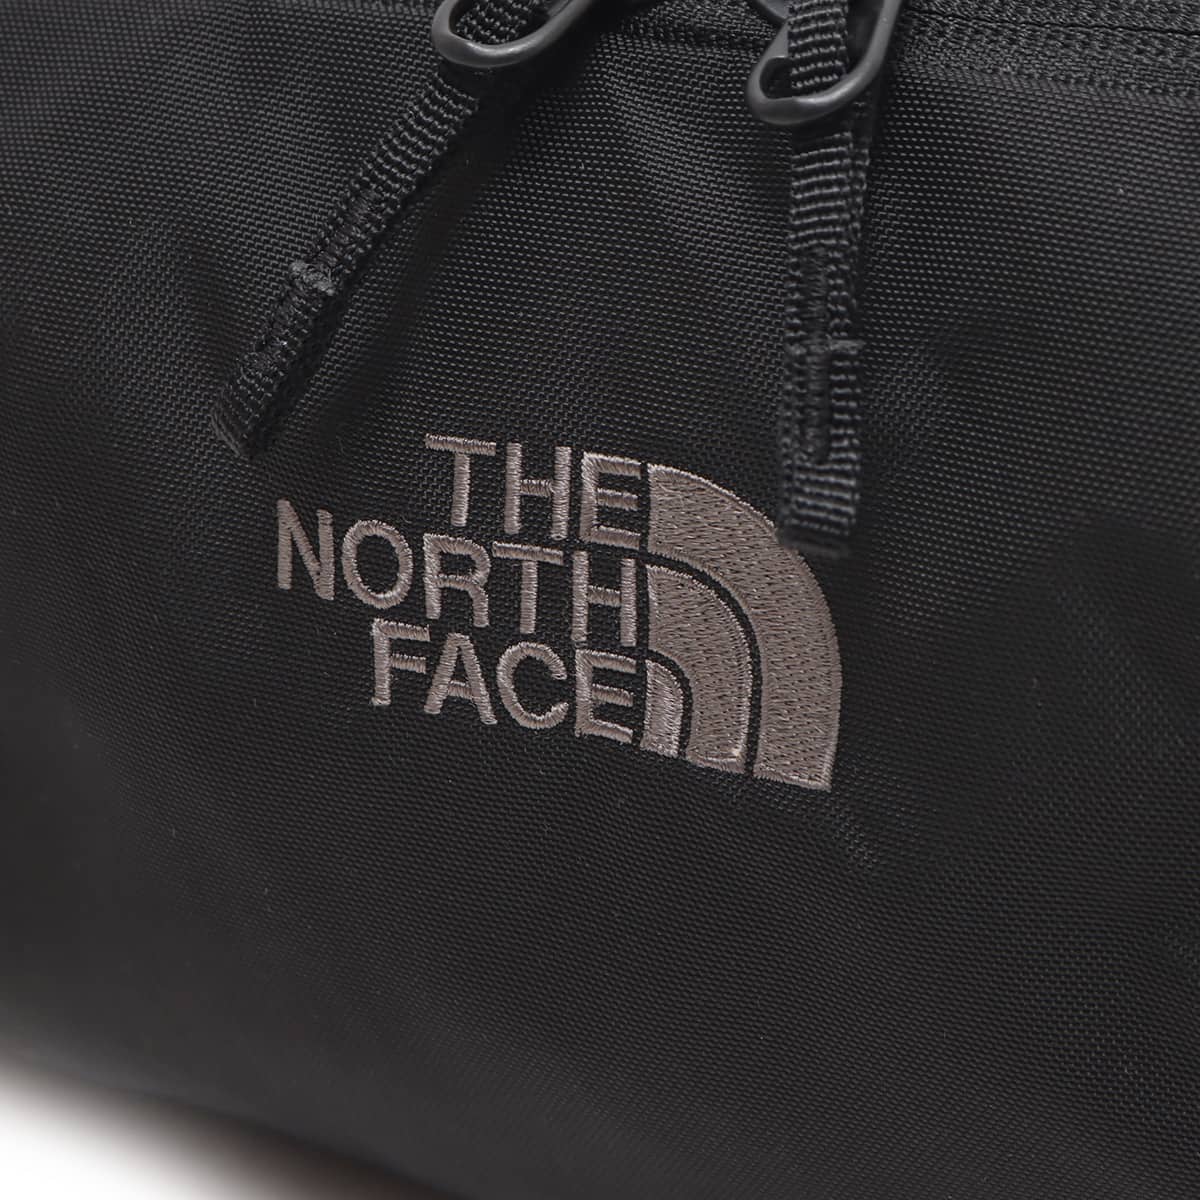 THE NORTH FACE ORION 3 BLACK 24SS-I